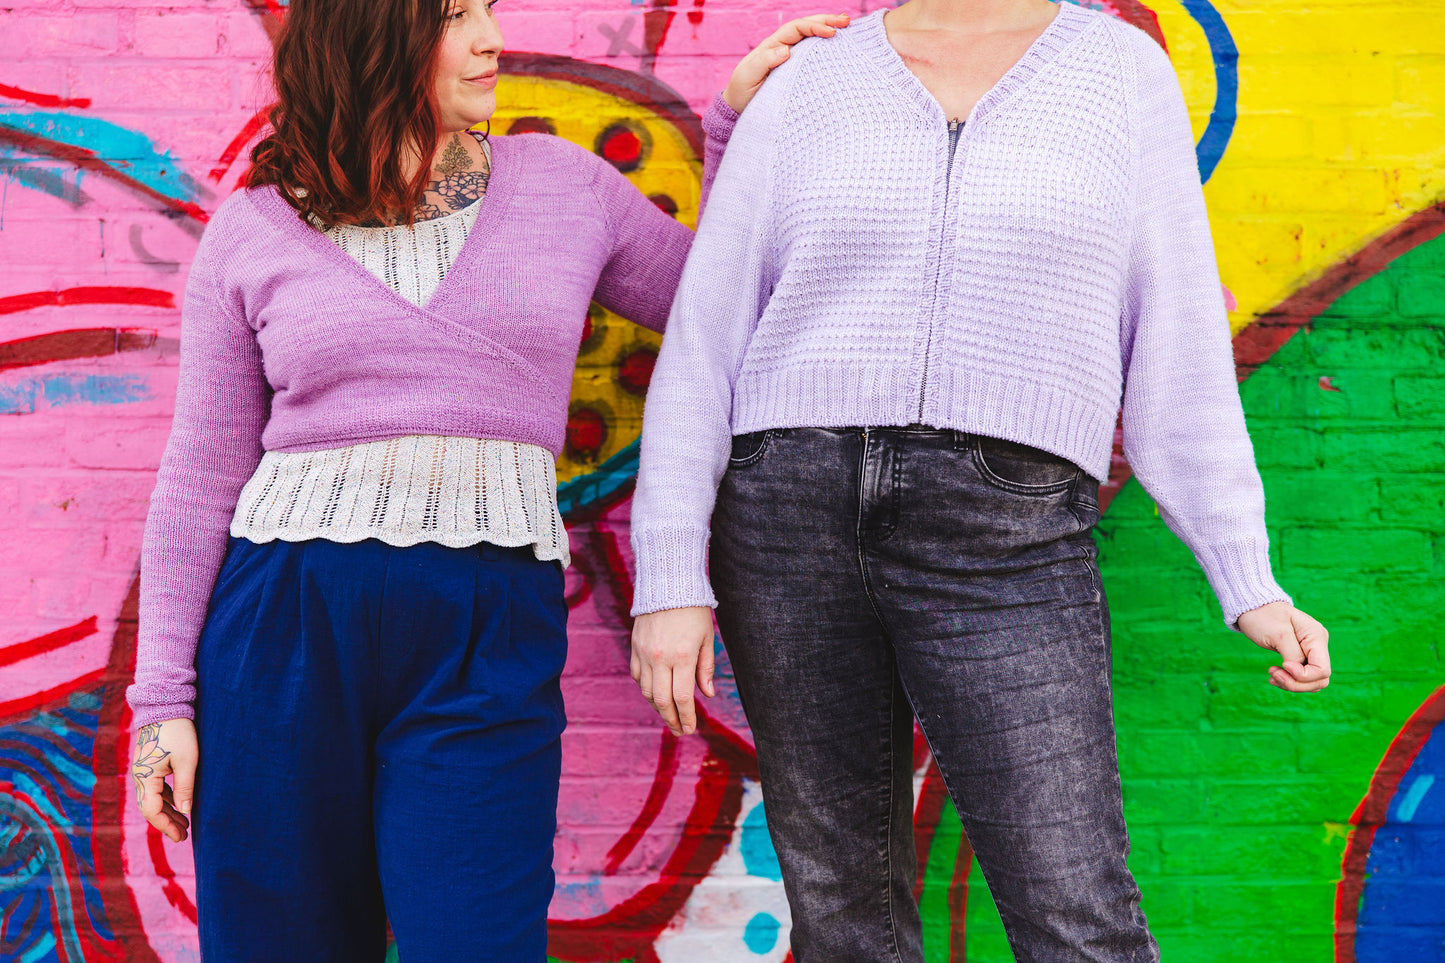 Bess stands, one hand on Jen's shoulder, in front of a wall mural. She wears a purple-pink knit ballet wrap over a lace knit cream tank with navy blue pants. Jen, standing next to her, wears a light purple zip-up sweater, knit with a V-neckline, with a pair of dark acid wash jeans.